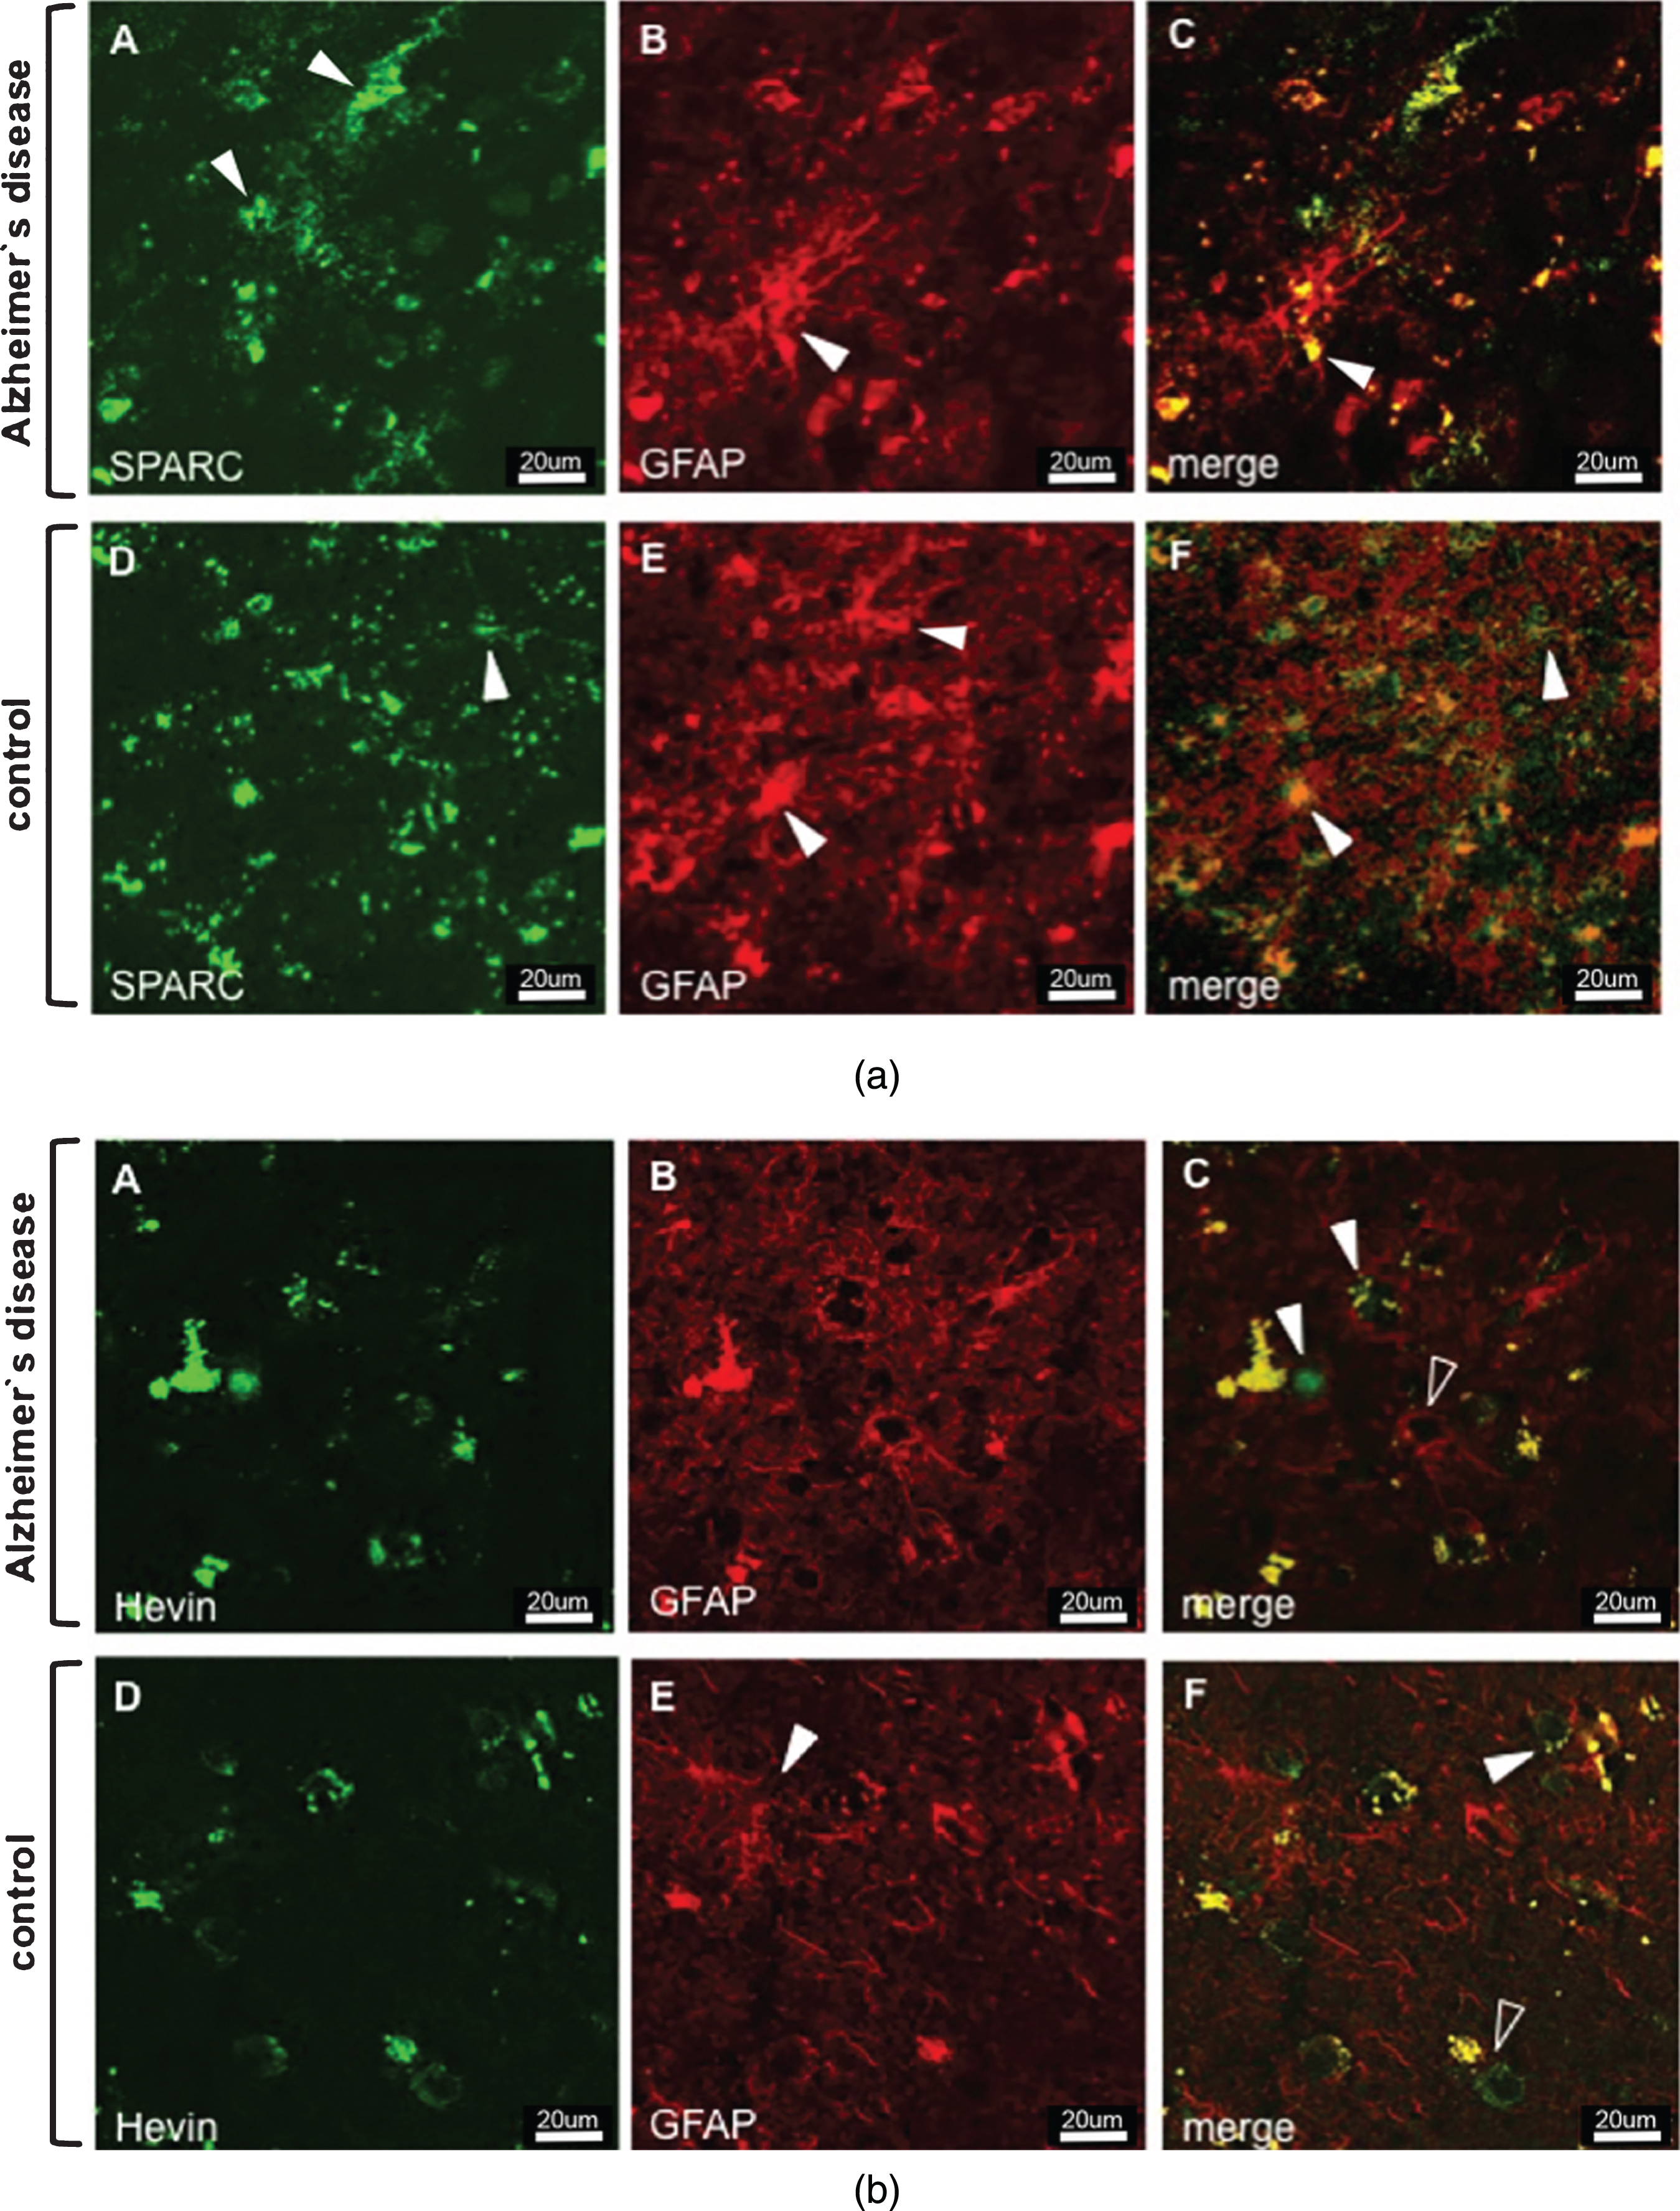 a) Immunostaining of SPARC and astrocytes in AD (images A–C) and control tissue (images D–F). Series A–C depicts increased AD-associated SPARC expression as compared to control tissue. The extracellular distribution of SPARC (arrowheads in A) is not associated with reactive AD astrocytic GFAP expression (arrowhead in B). Images D–F show that extracellular SPARC (arrowhead in D) is not associated with quiescent control astrocytes (arrowheads in E). Lipofuscin fluoresces in both the red and green channels and appears yellow in the merged images (arrowhead in G and F). b) Immunostaining of Hevin and astrocytes in AD (images A–C) and control tissue (images D–F). Hevin is expressed to a lesser extent in AD samples and is clearly not associated with astrocytic activity, cf. arrowheads in image C. Instead, astrocytes seem to gather around neurons (arrowhead, image C) and blood vessels (open arrowhead, image C). Control tissue has distinct Hevin positive cells that are likely to be neurons (arrowhead, image F) and other cell types (open arrowhead, image F). Yellow structures in C and F are lipofuscin in degenerate neurons or extracellular deposits.